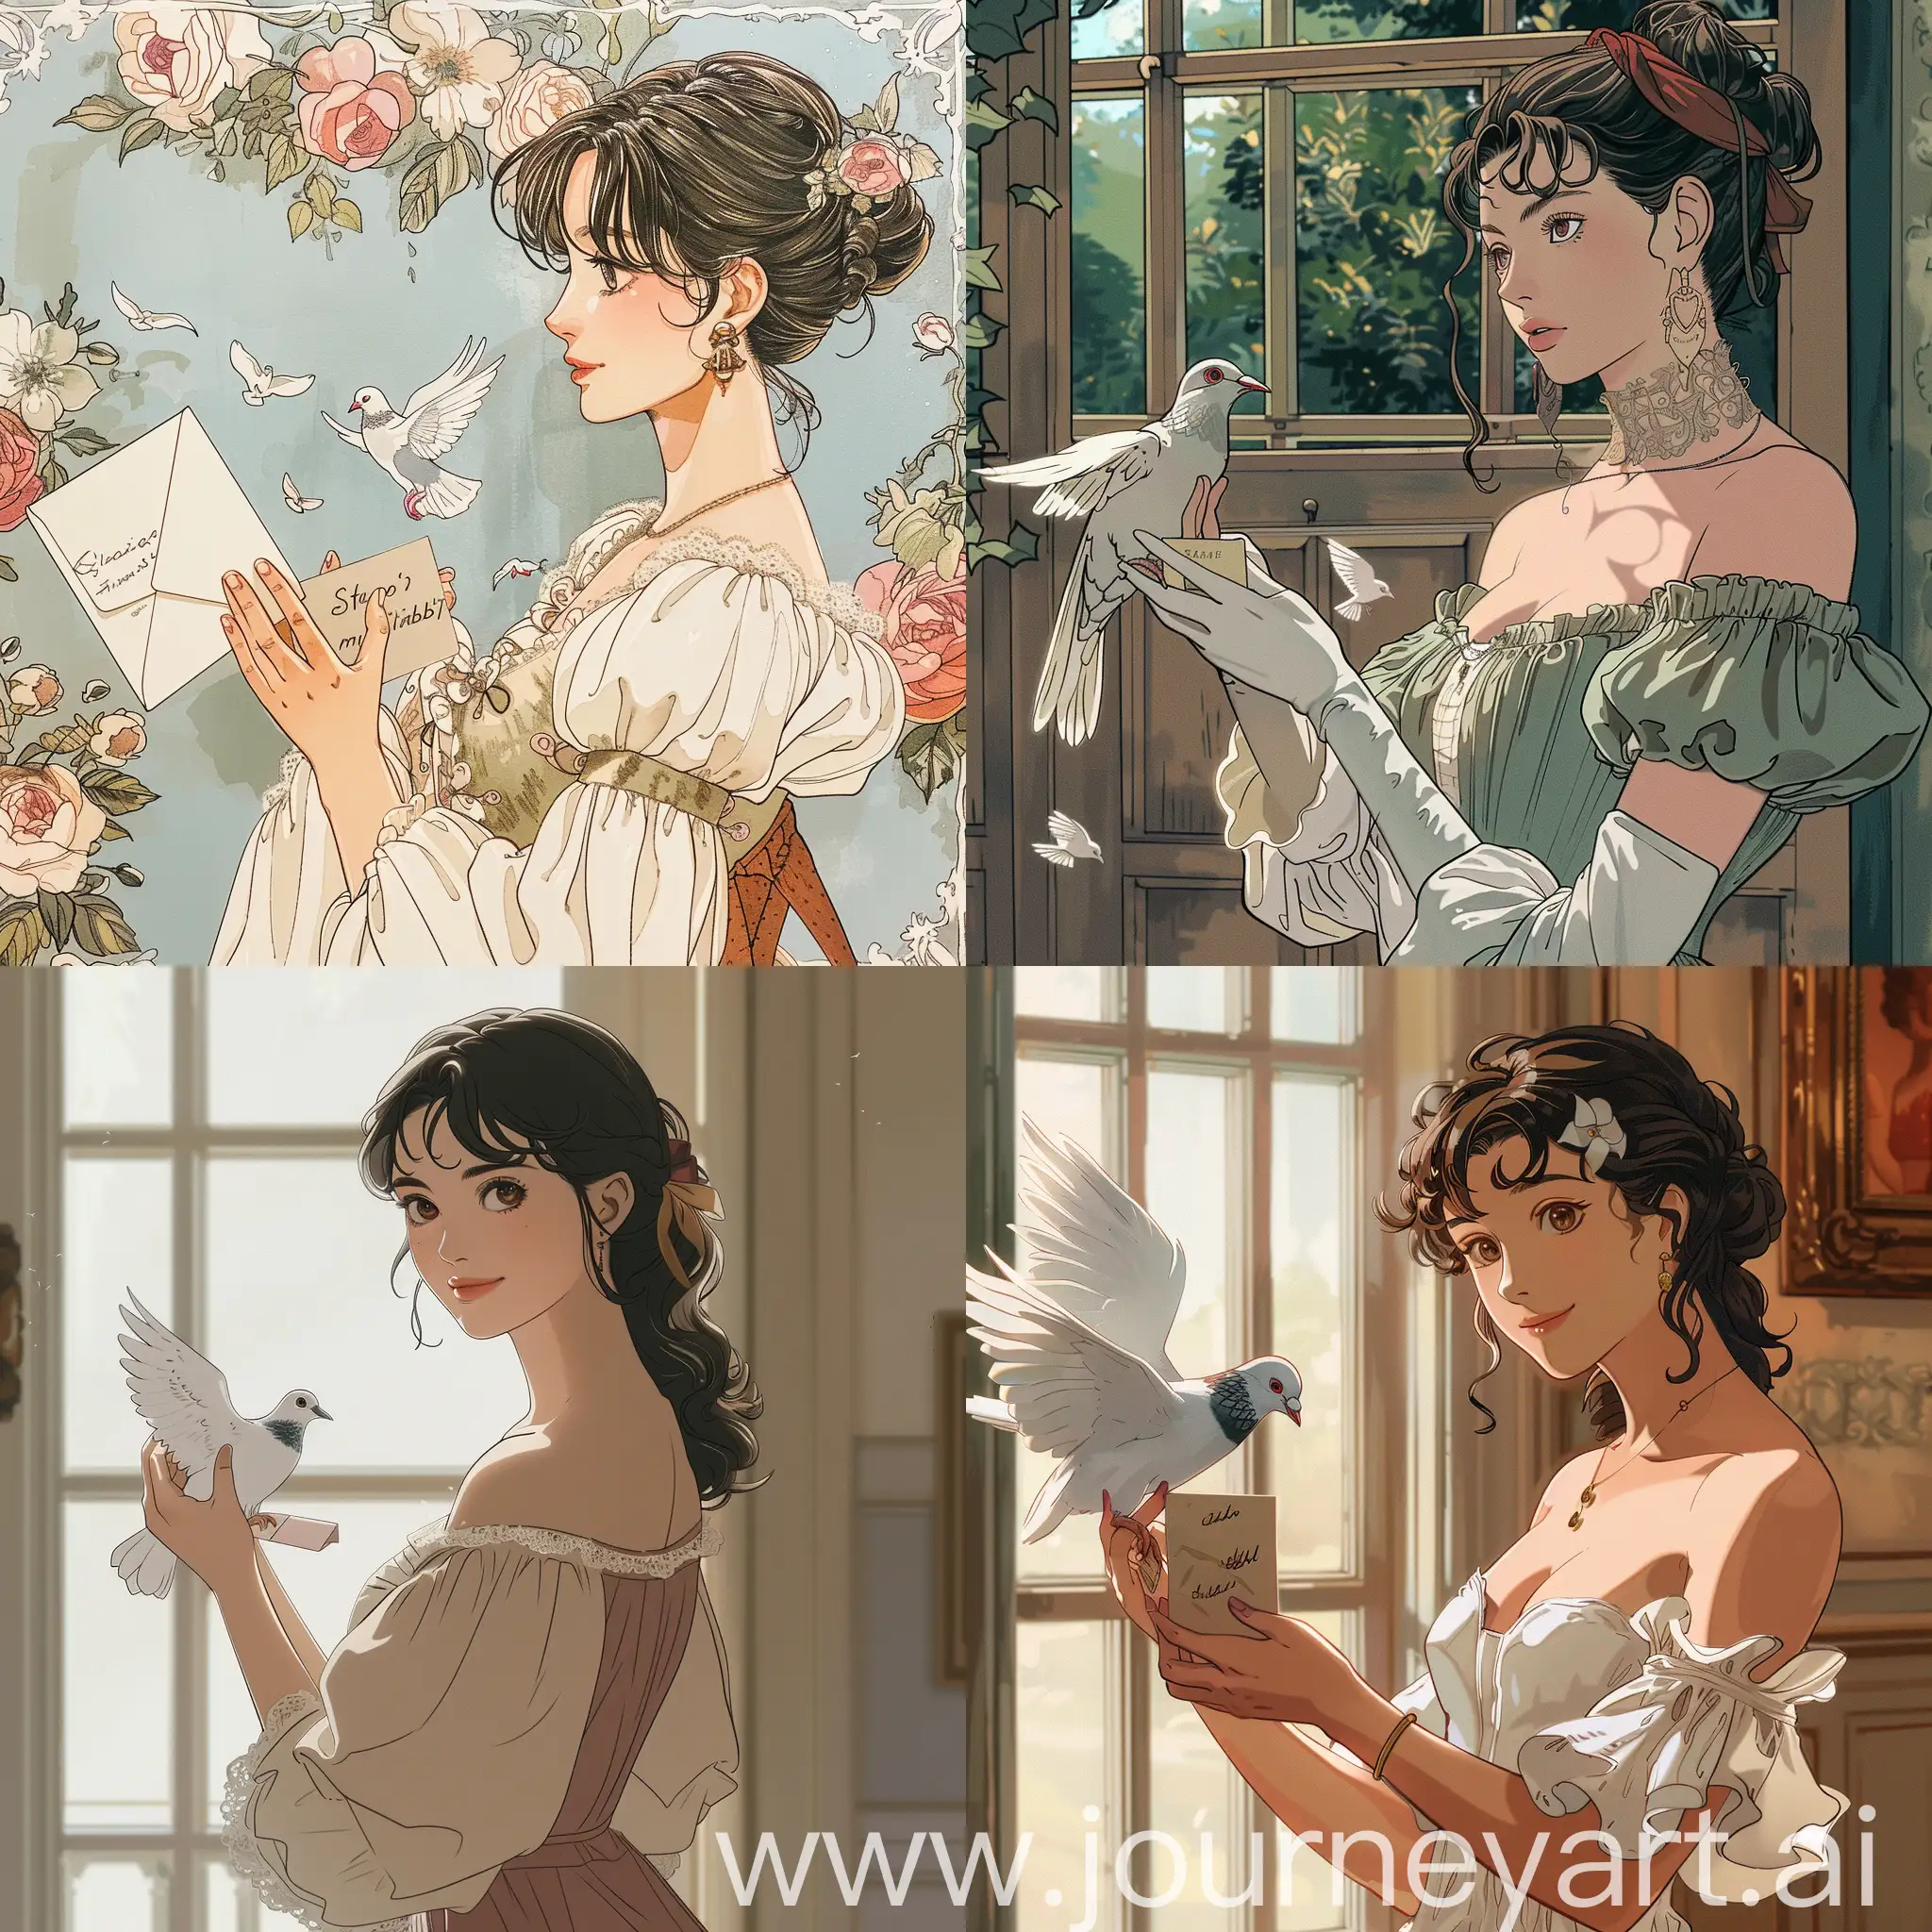 Hayao-Miyazaki-Style-Illustration-Brunette-Woman-with-Dove-and-Letter-in-Hand